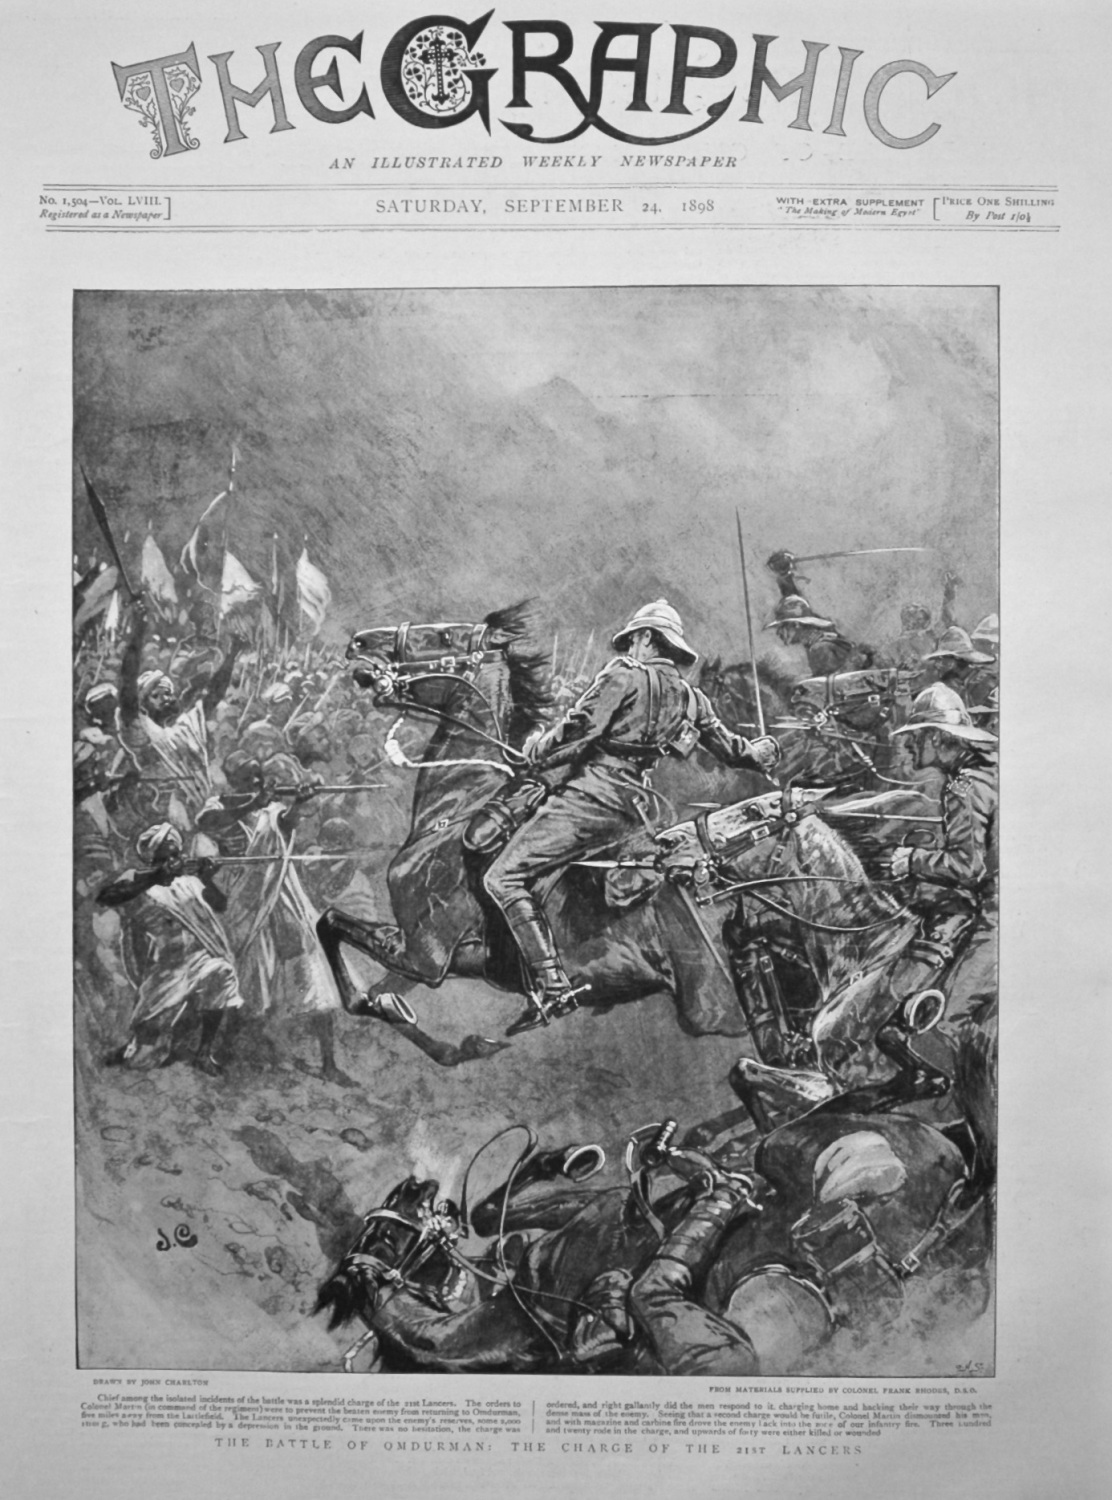 The Battle of Omdurman : The Charge of the 21st Lancers. 1898.